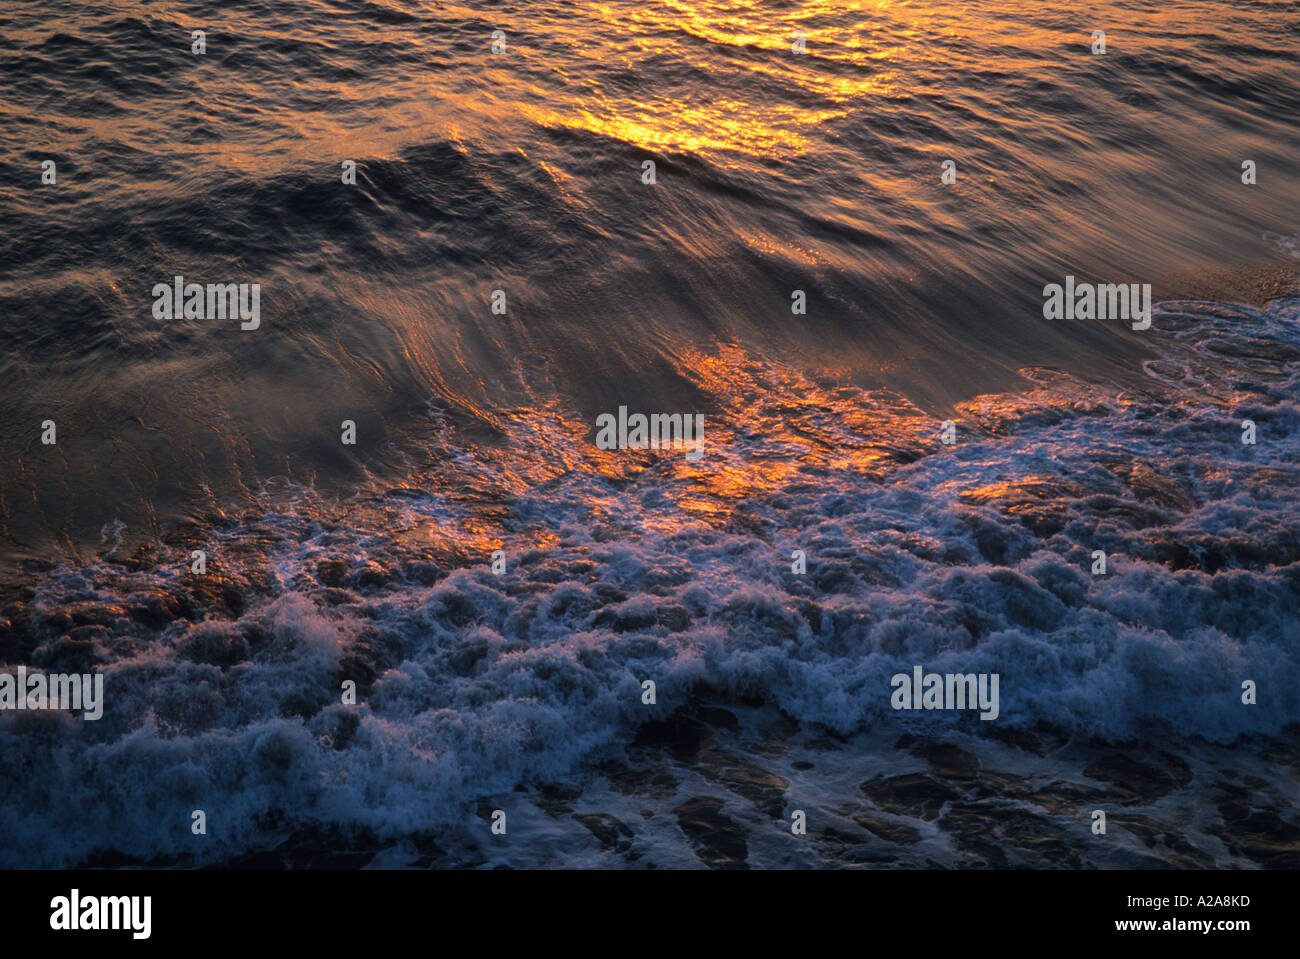 The Pacific Ocean at sunset along the Sonoma County coastline in California. Stock Photo